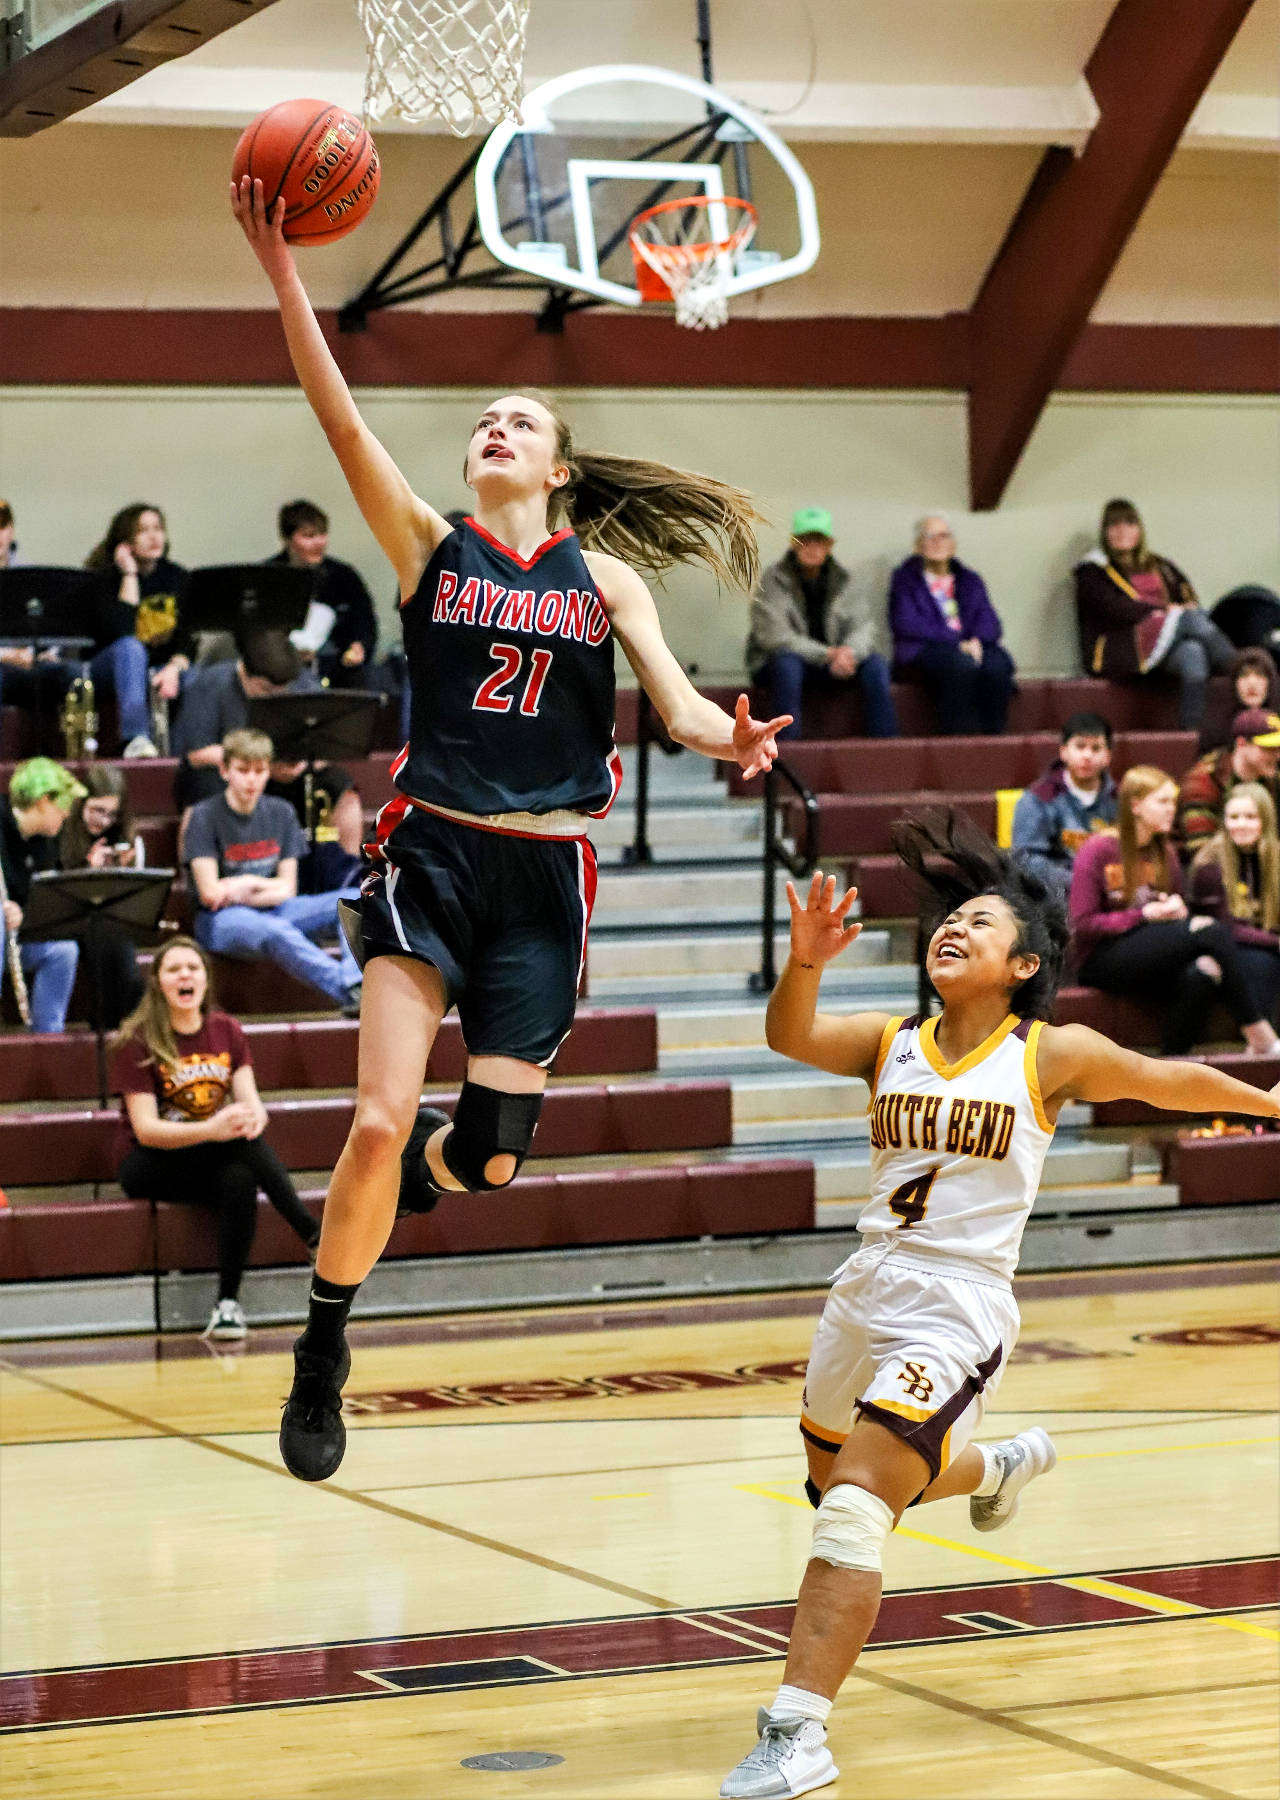 Raymond sophomore Kyra Gardner glides to the basket while South Bend’s Zaira Medina looks on in Raymond’s 50-13 victory on Thursday in South Bend. Gardner scored a game-high 27 points in the contest. (Photo by Larry Bale)